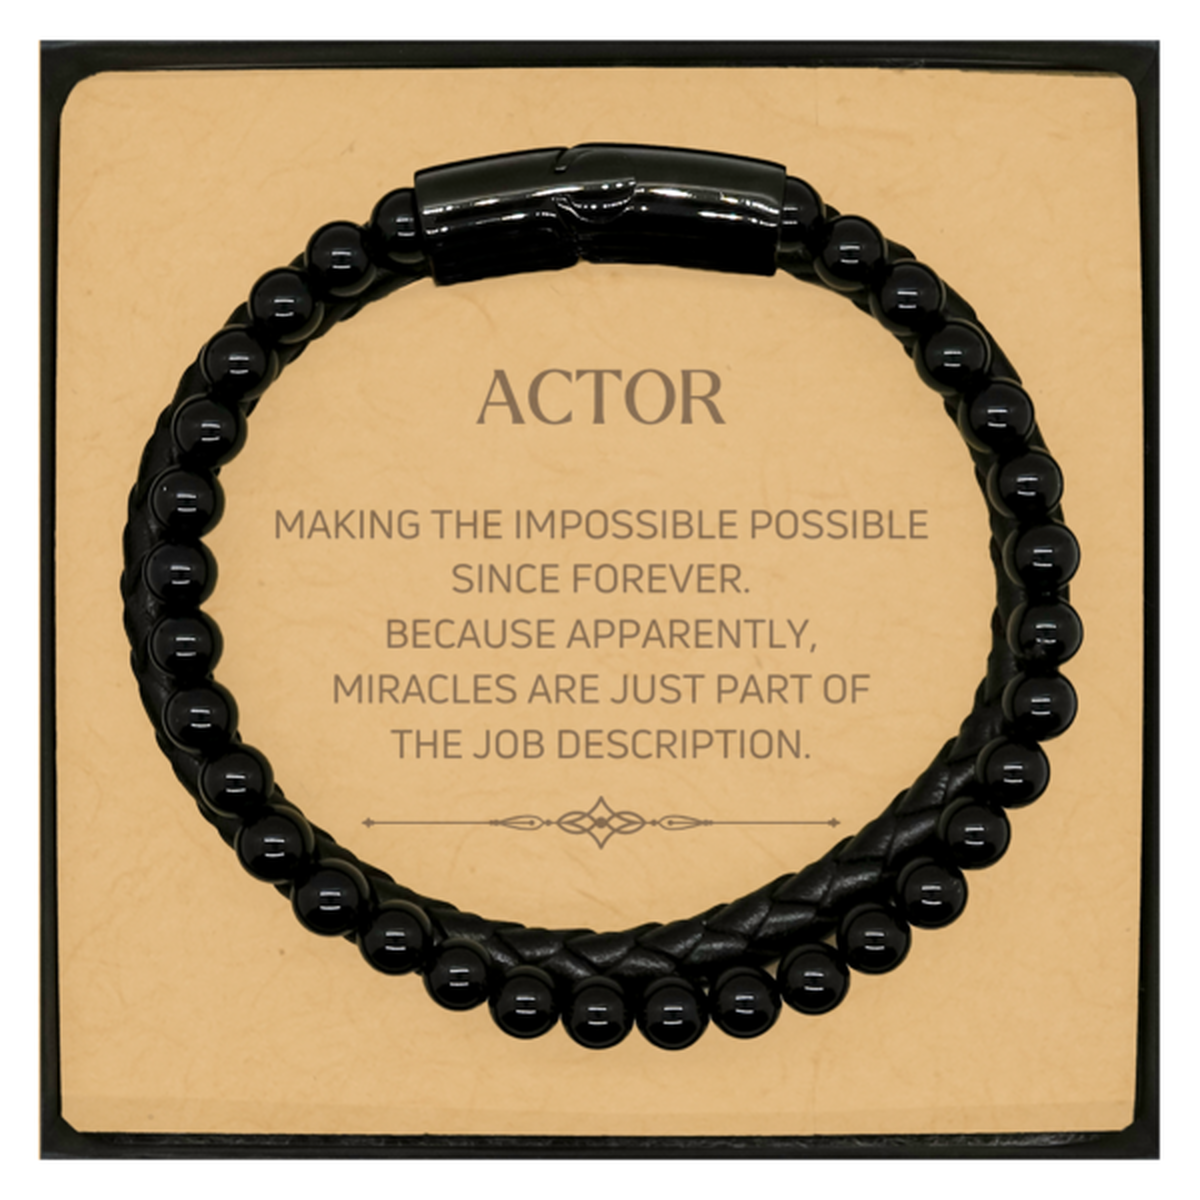 Funny Actor Gifts, Miracles are just part of the job description, Inspirational Birthday Christmas Stone Leather Bracelets For Actor, Men, Women, Coworkers, Friends, Boss